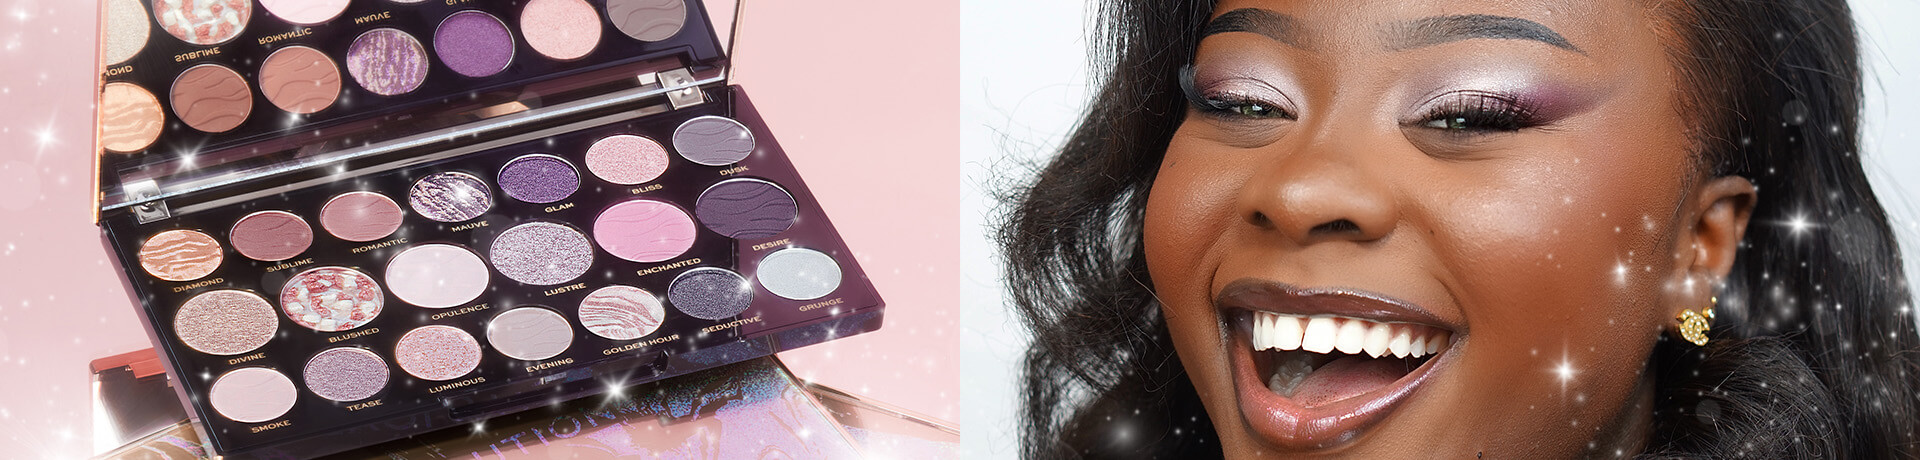 The Best Make-up Hacks for a Long Lasting New Year's Glam